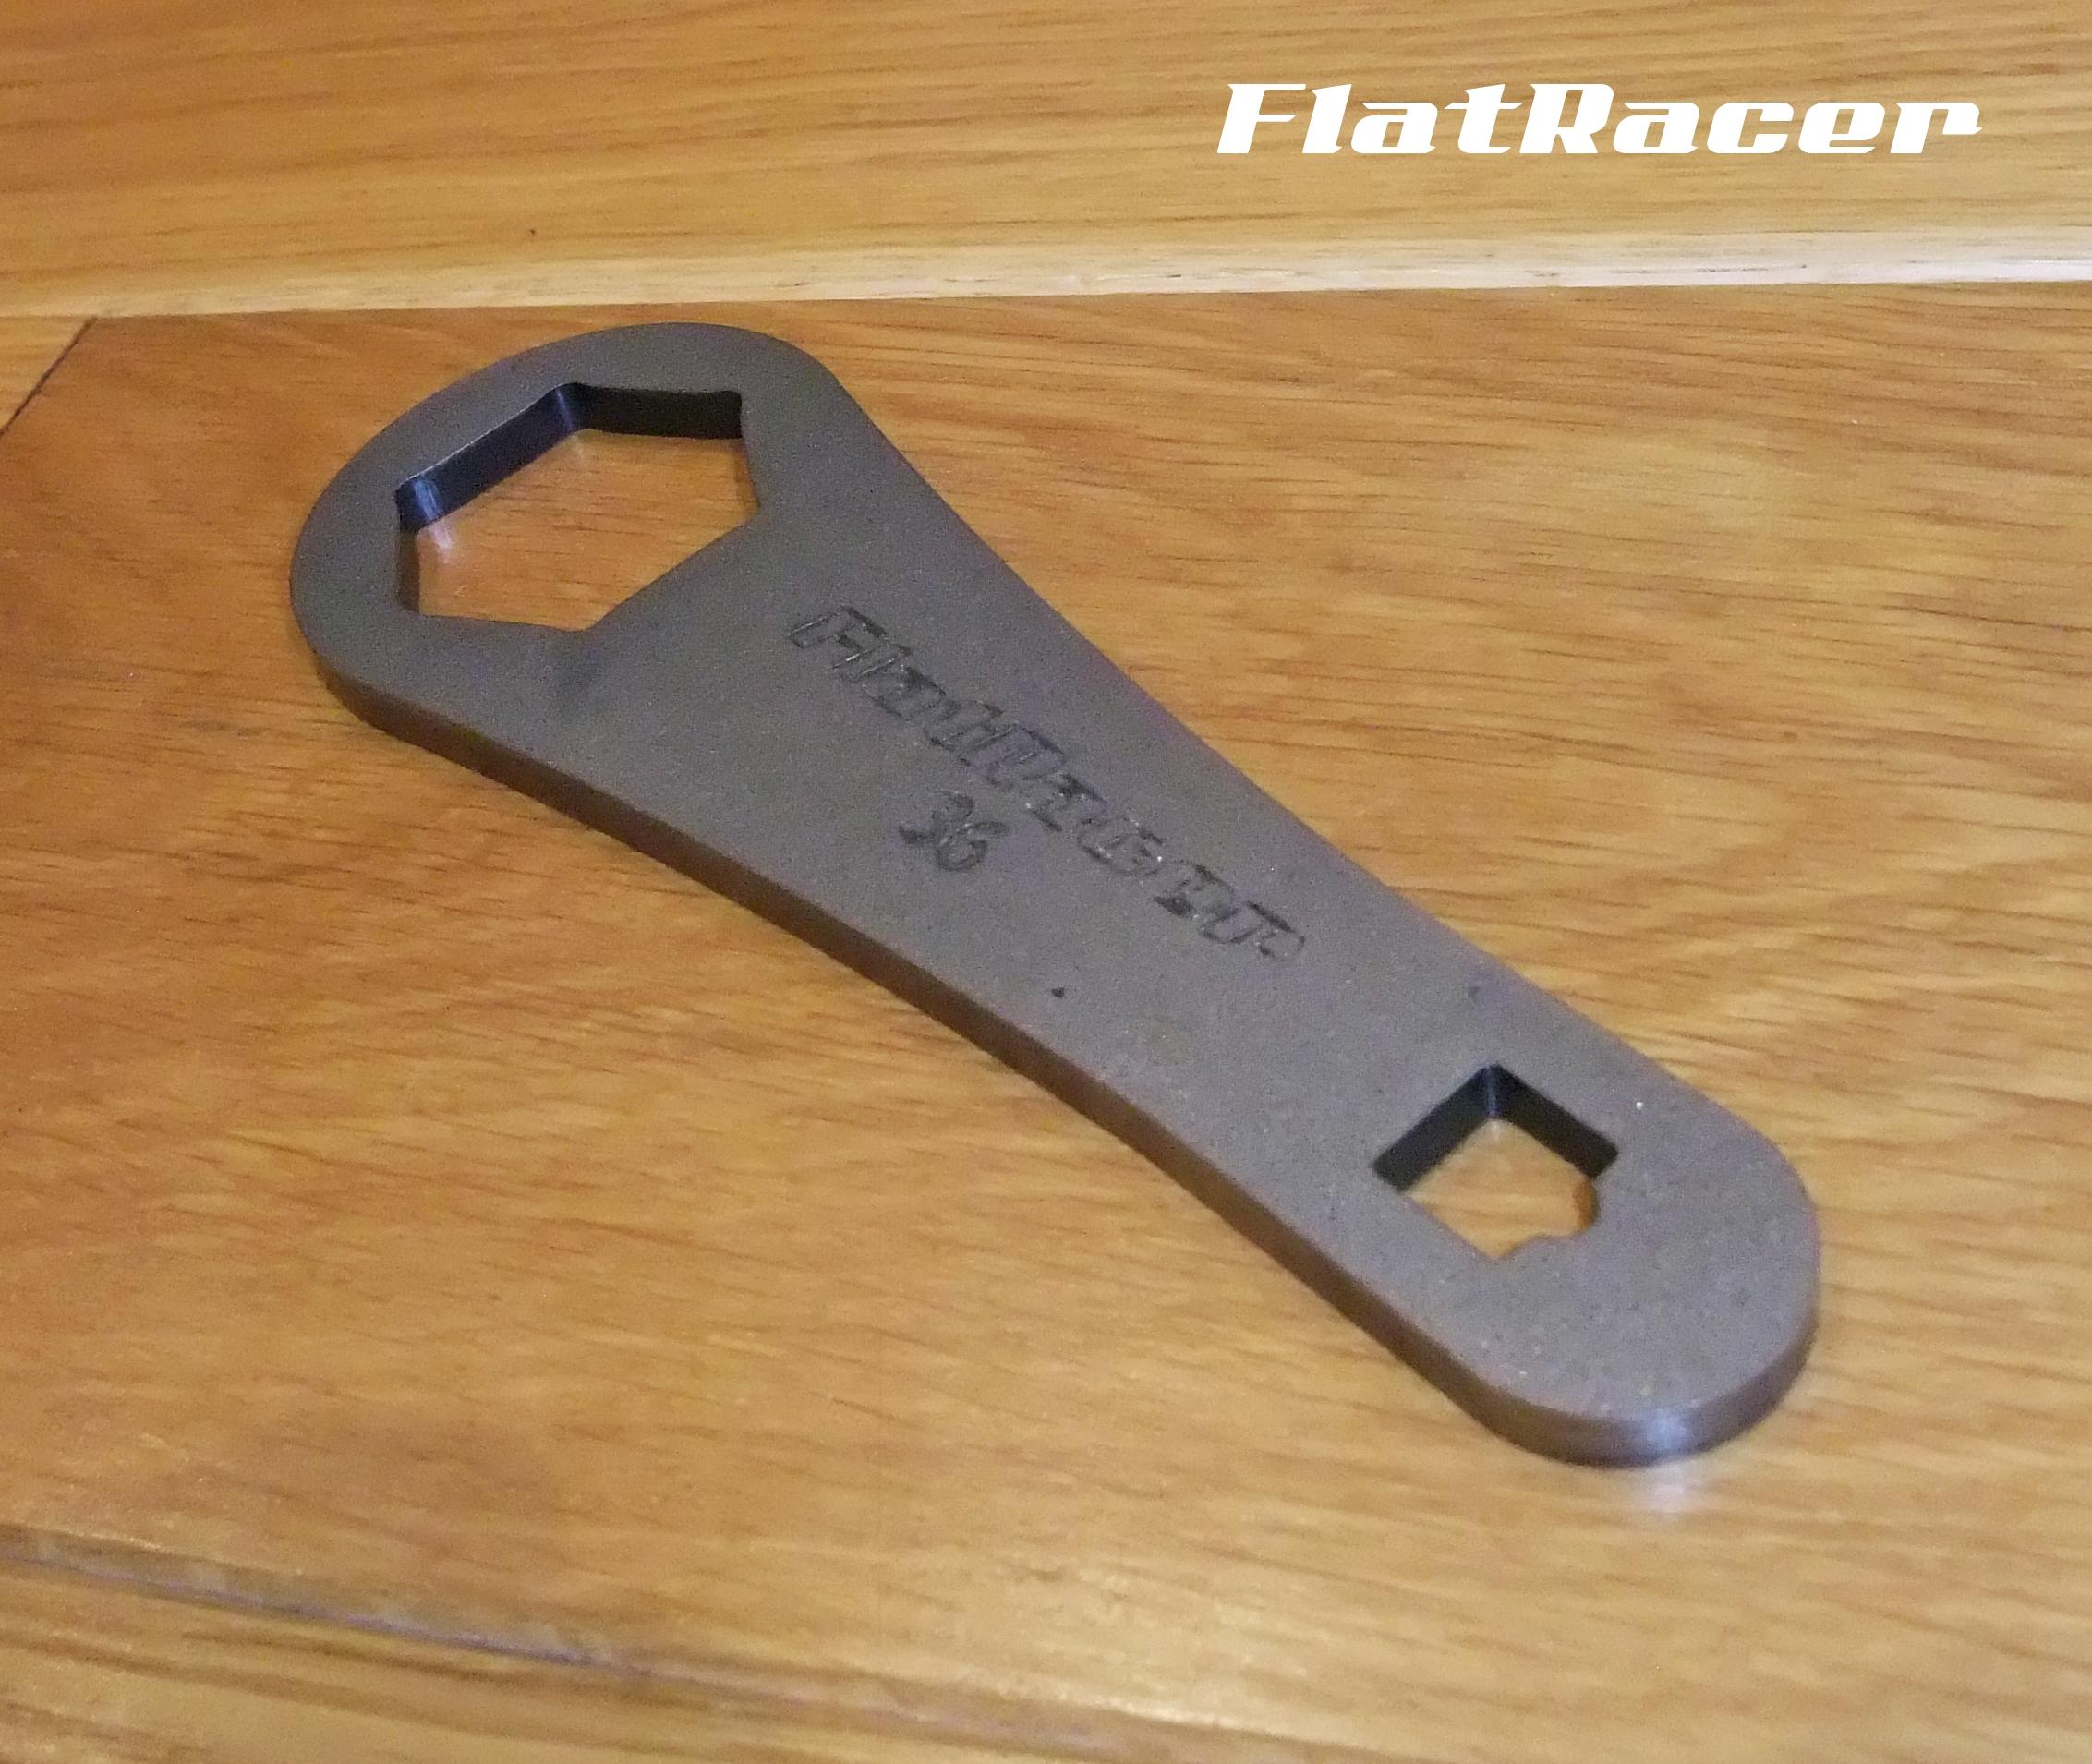 FlatRacer BMW Airhead Boxer steering & top nuts 36mm spanner tool 31-4-850